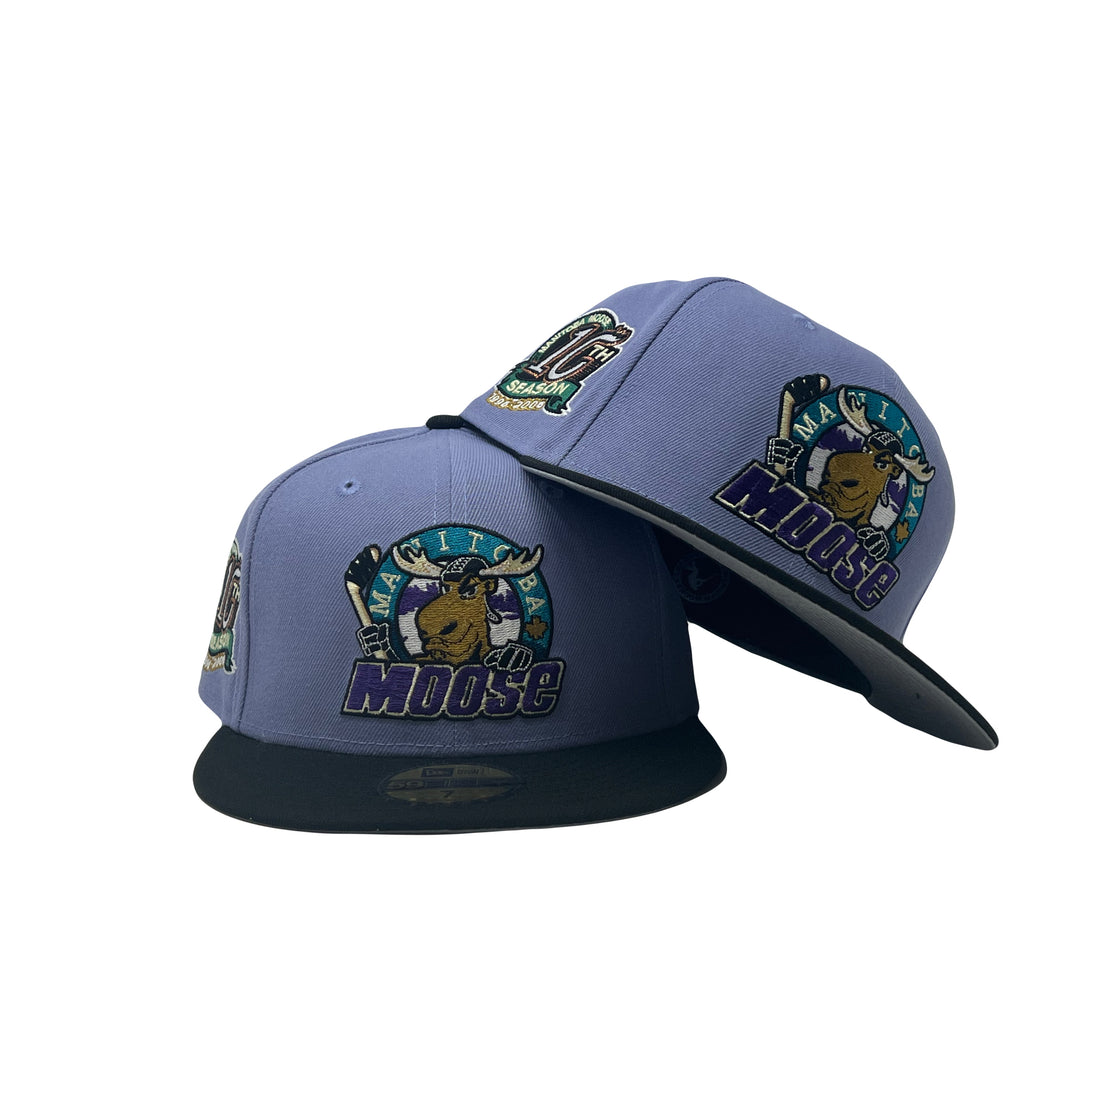 Manitoba Moose 10th Anniversary American Hockey League 5950 New Era Fitted Hat